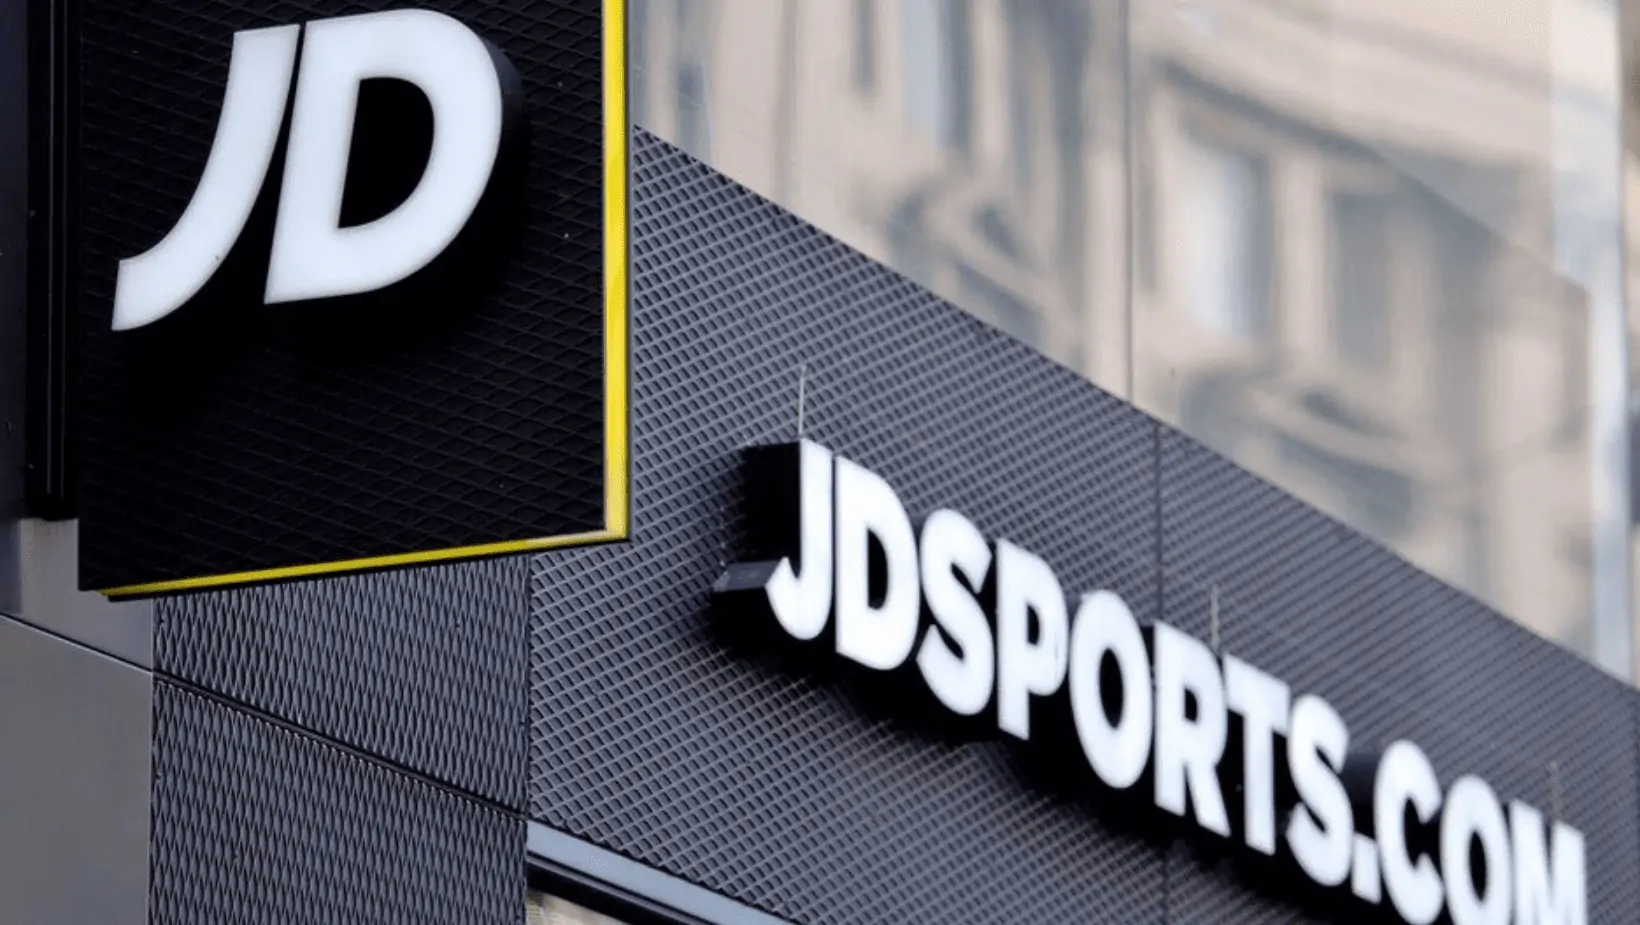 TFG Partners with JD Sports: Launching Over 40 Stores in South Africa